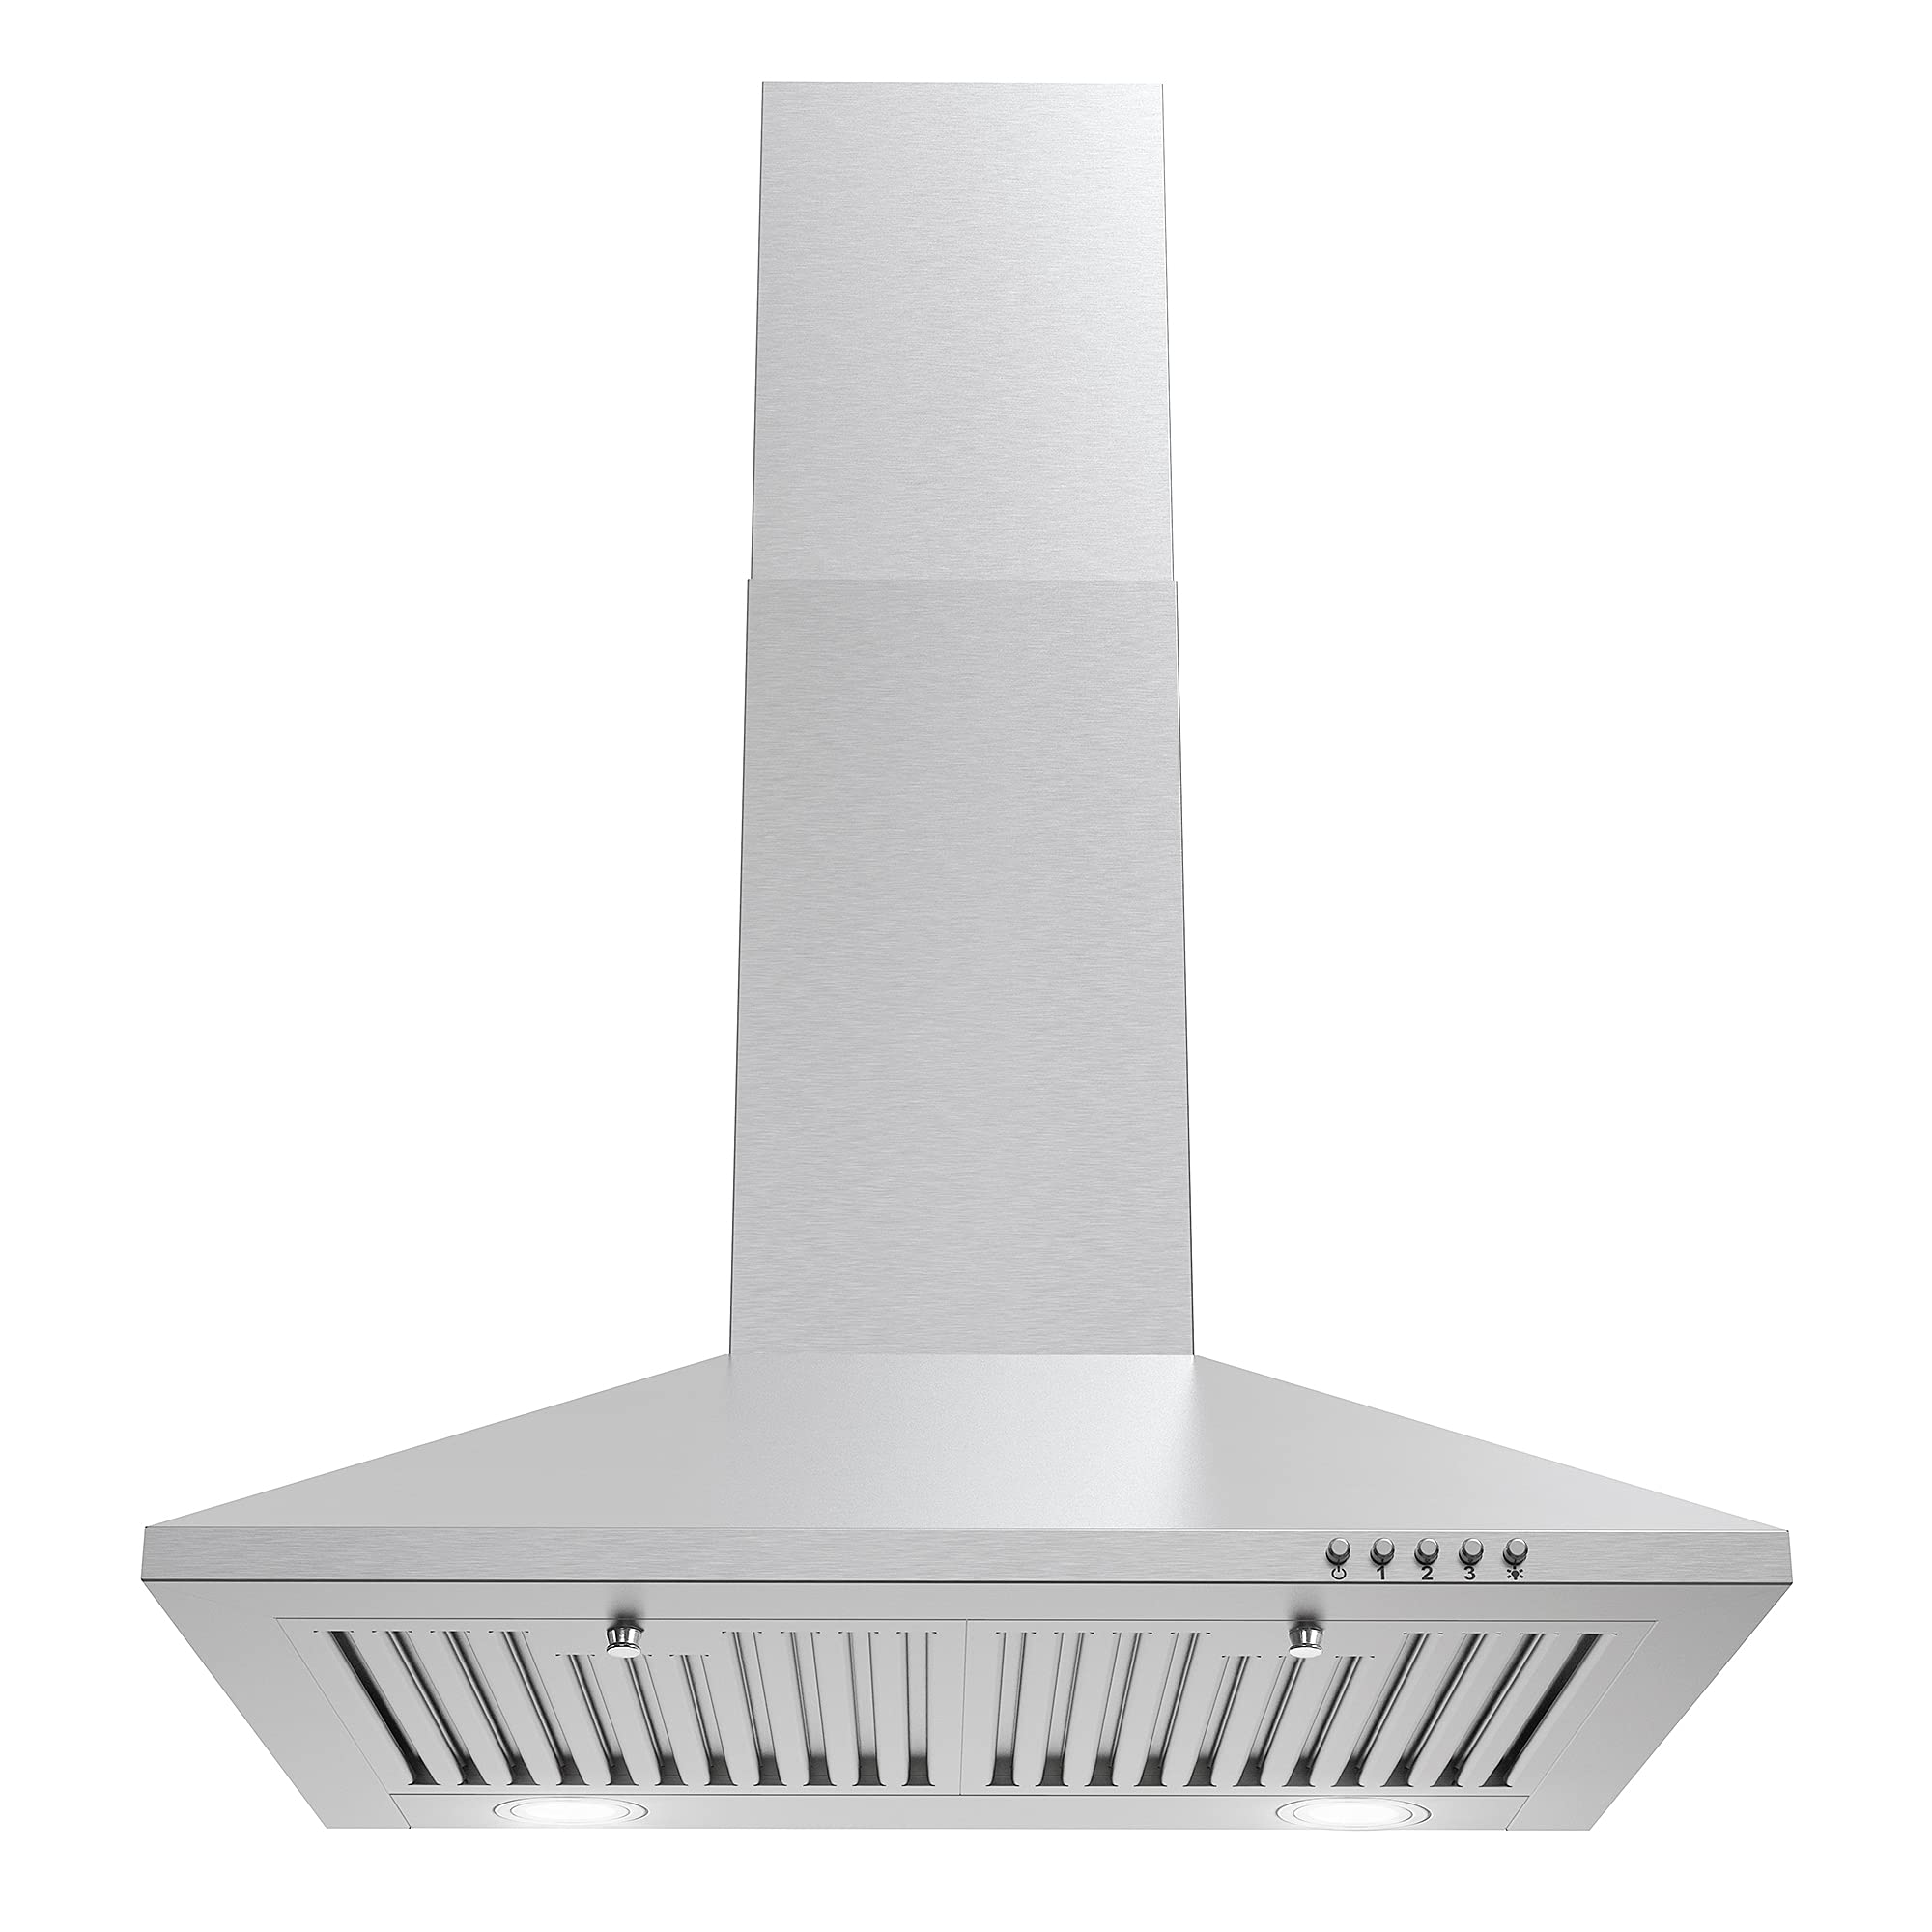 Cosmo 63175 30-in Wall-Mount Range Hood 380-CFM | Ducted/Ductless Convertible Duct, Ceiling Chimney Over Stove Vent with LED Light, 3 Speed Exhaust Fan, Permanent Filter (Stainless Steel)